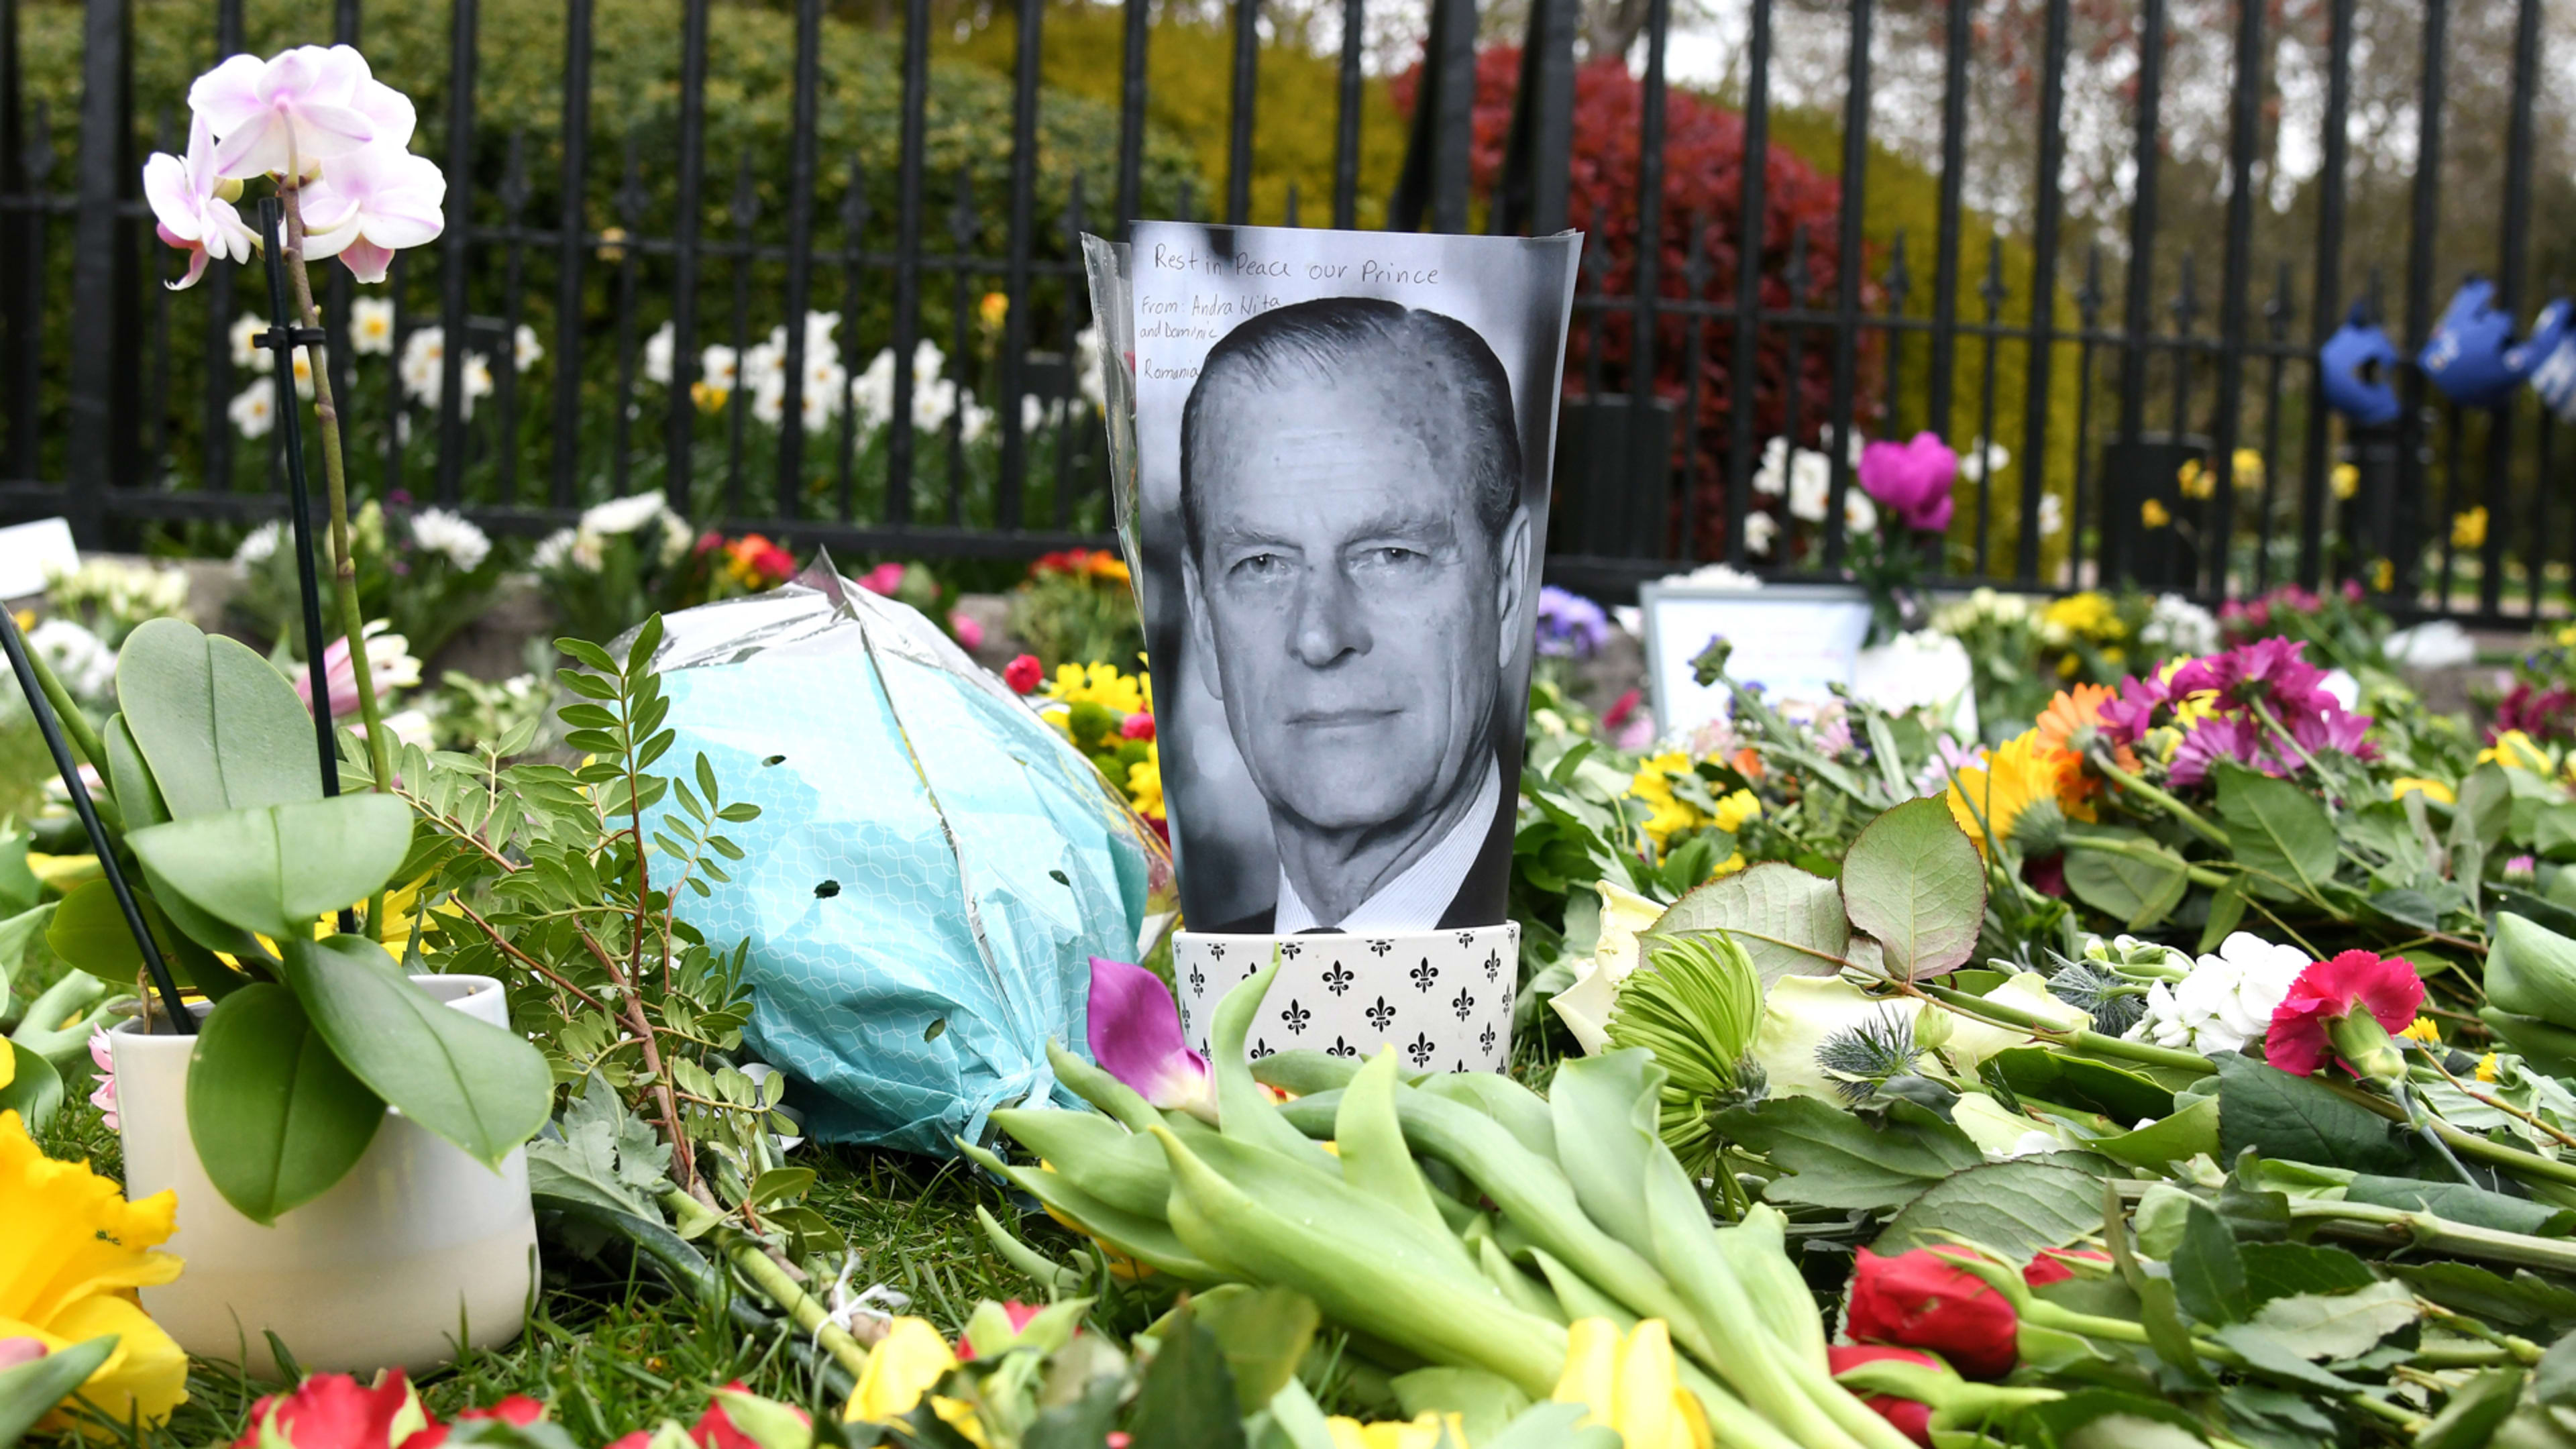 How to watch Prince Philip’s funeral on CNN, ABC, CBS, and elsewhere, including free options